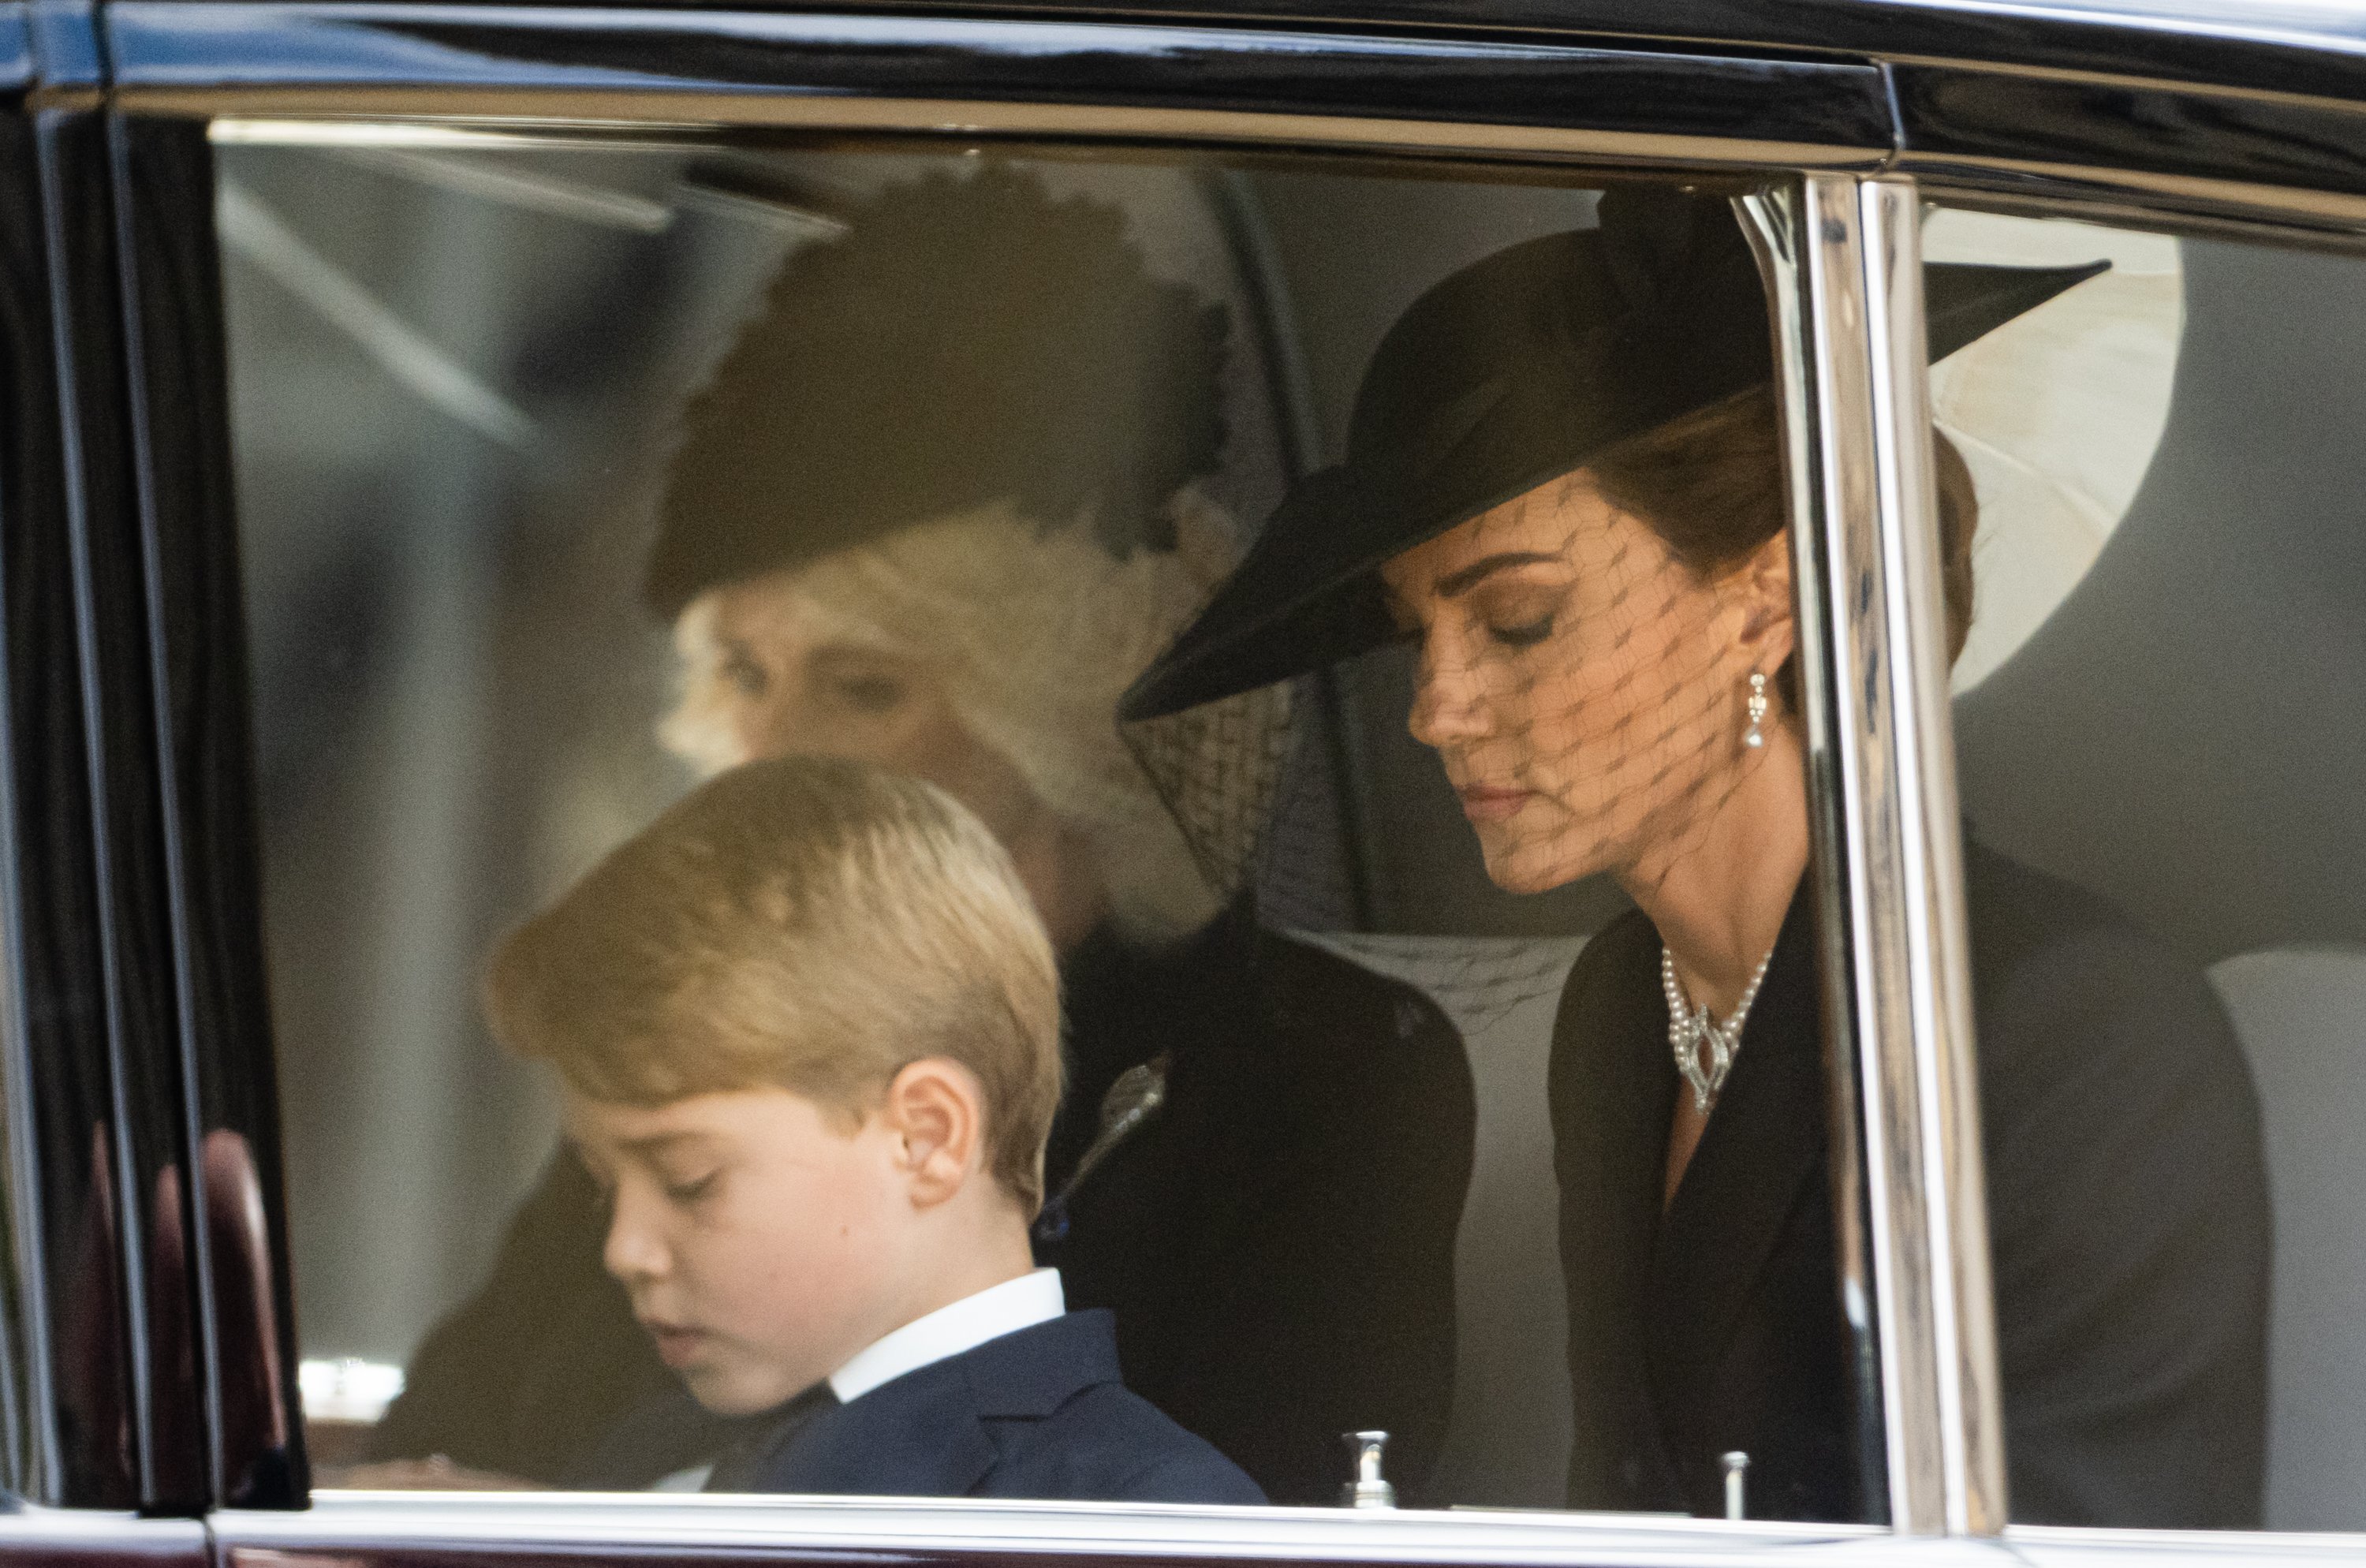 Prince George of Wales, Camilla, Queen Consort, and Catherine, Princess of Wales, during the State Funeral of Queen Elizabeth II at Westminster Abbey on September 19, 2022, in London, England. | Source: Getty Images